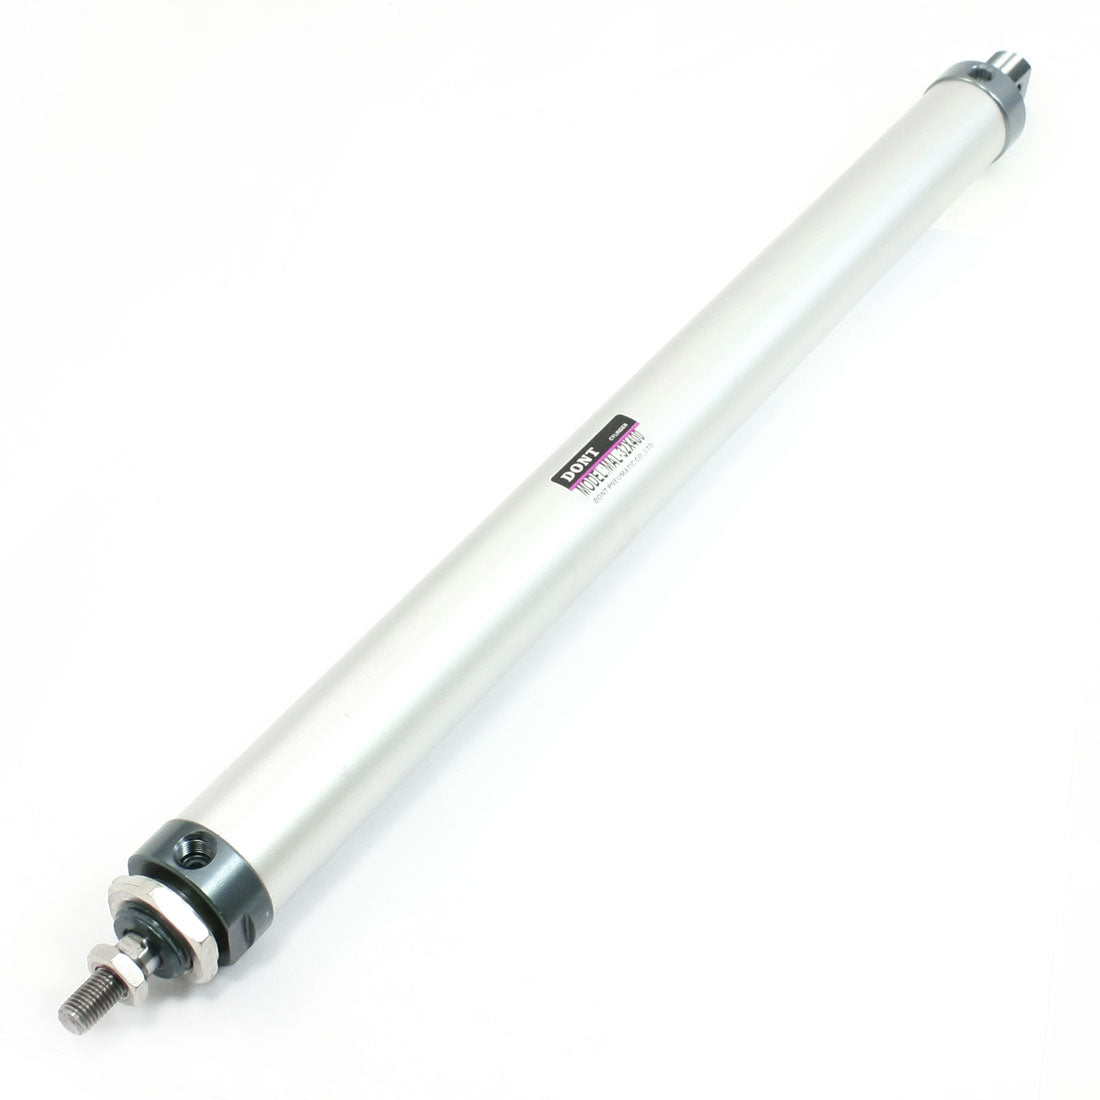 uxcell Uxcell 32mm Bore 400mm Stroke Aluminum Alloy Pneumatic Air Cylinder Replacement